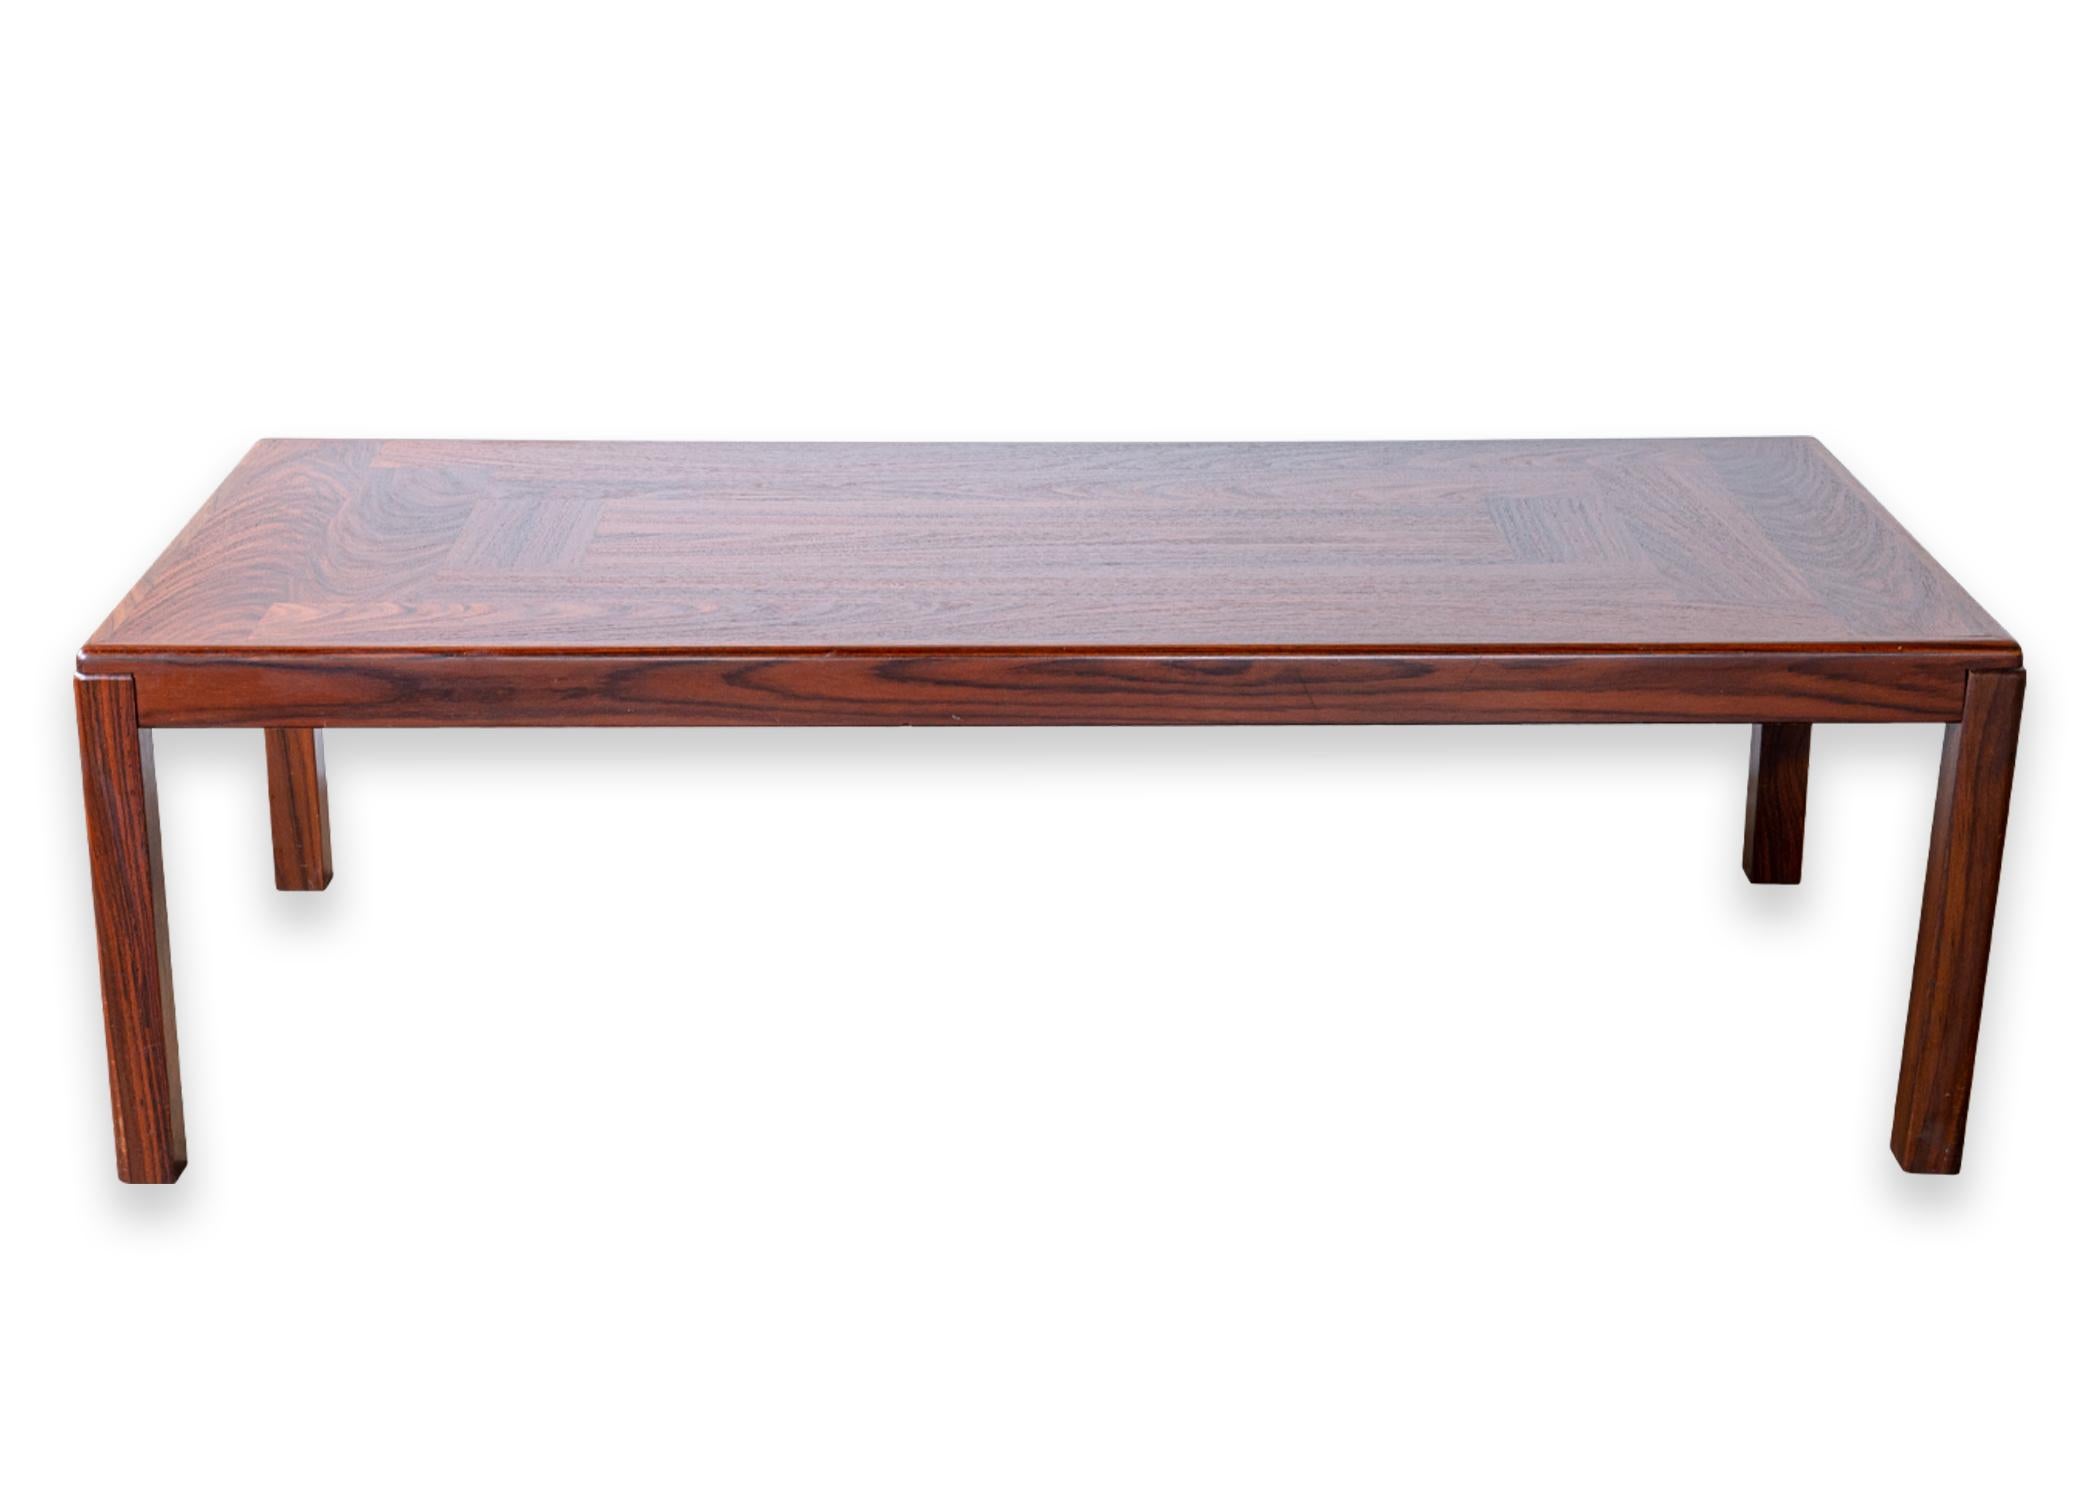 20th Century Vejle Stole and Mbelfabrik Danish Rosewood Rectangular Coffee Cocktail Table For Sale